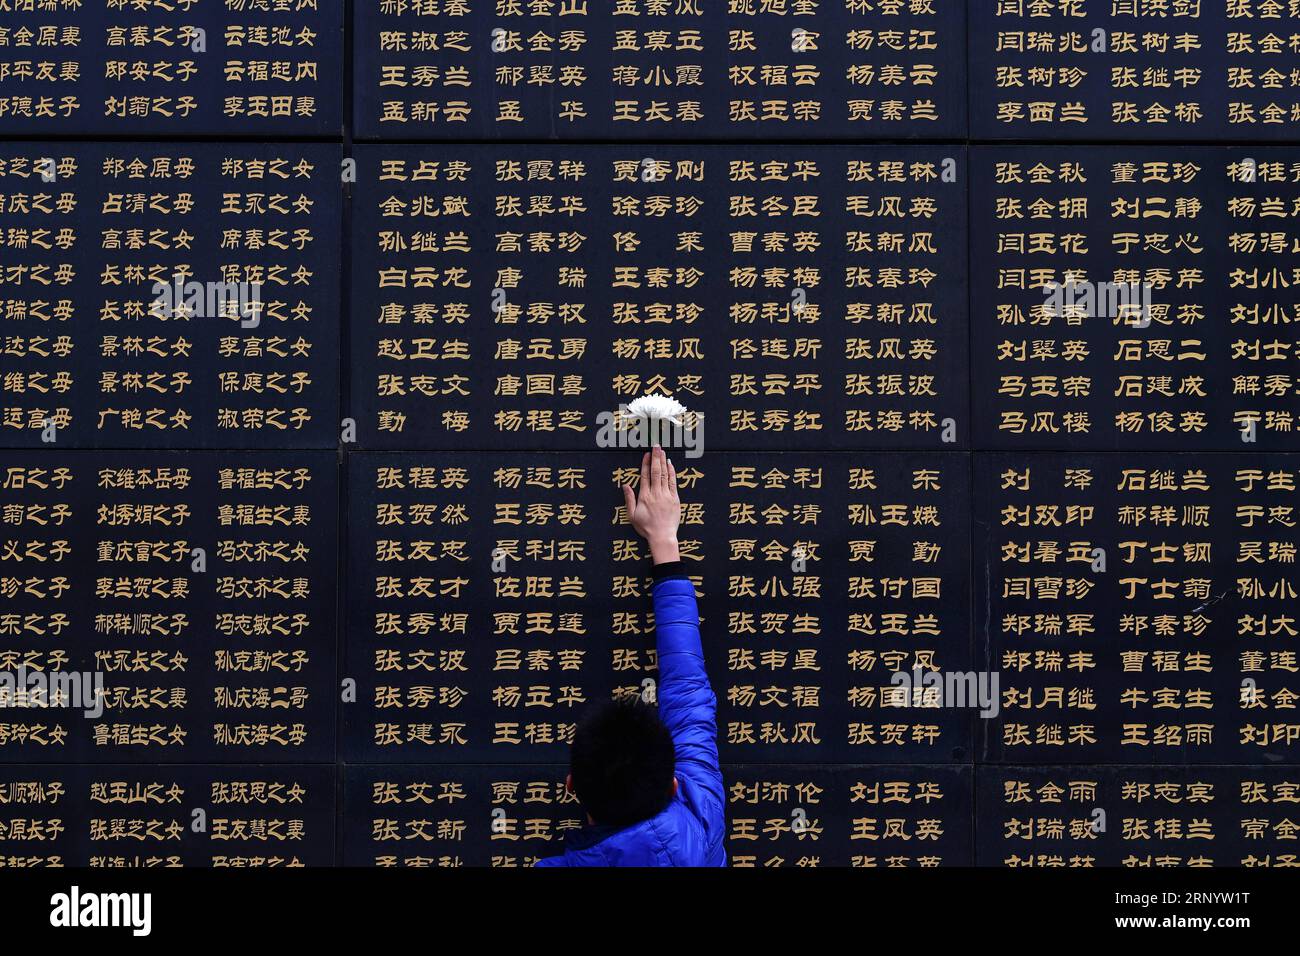 (180404) -- TANGSHAN, April 4, 2018 -- A well-wisher attaches a white chrysanthemum to a memorial wall in remembrance of victims in the 1976 Tangshan Earthquake in Tangshan, north China s Hebei Province, on April 4, 2018, one day before the Qingming Festival when the deceased are commemorated. ) (lmm) CHINA-HEBEI-EARTHQUAKE-VICTIM-REMEMBRANCE (CN) DongxJun PUBLICATIONxNOTxINxCHN Stock Photo